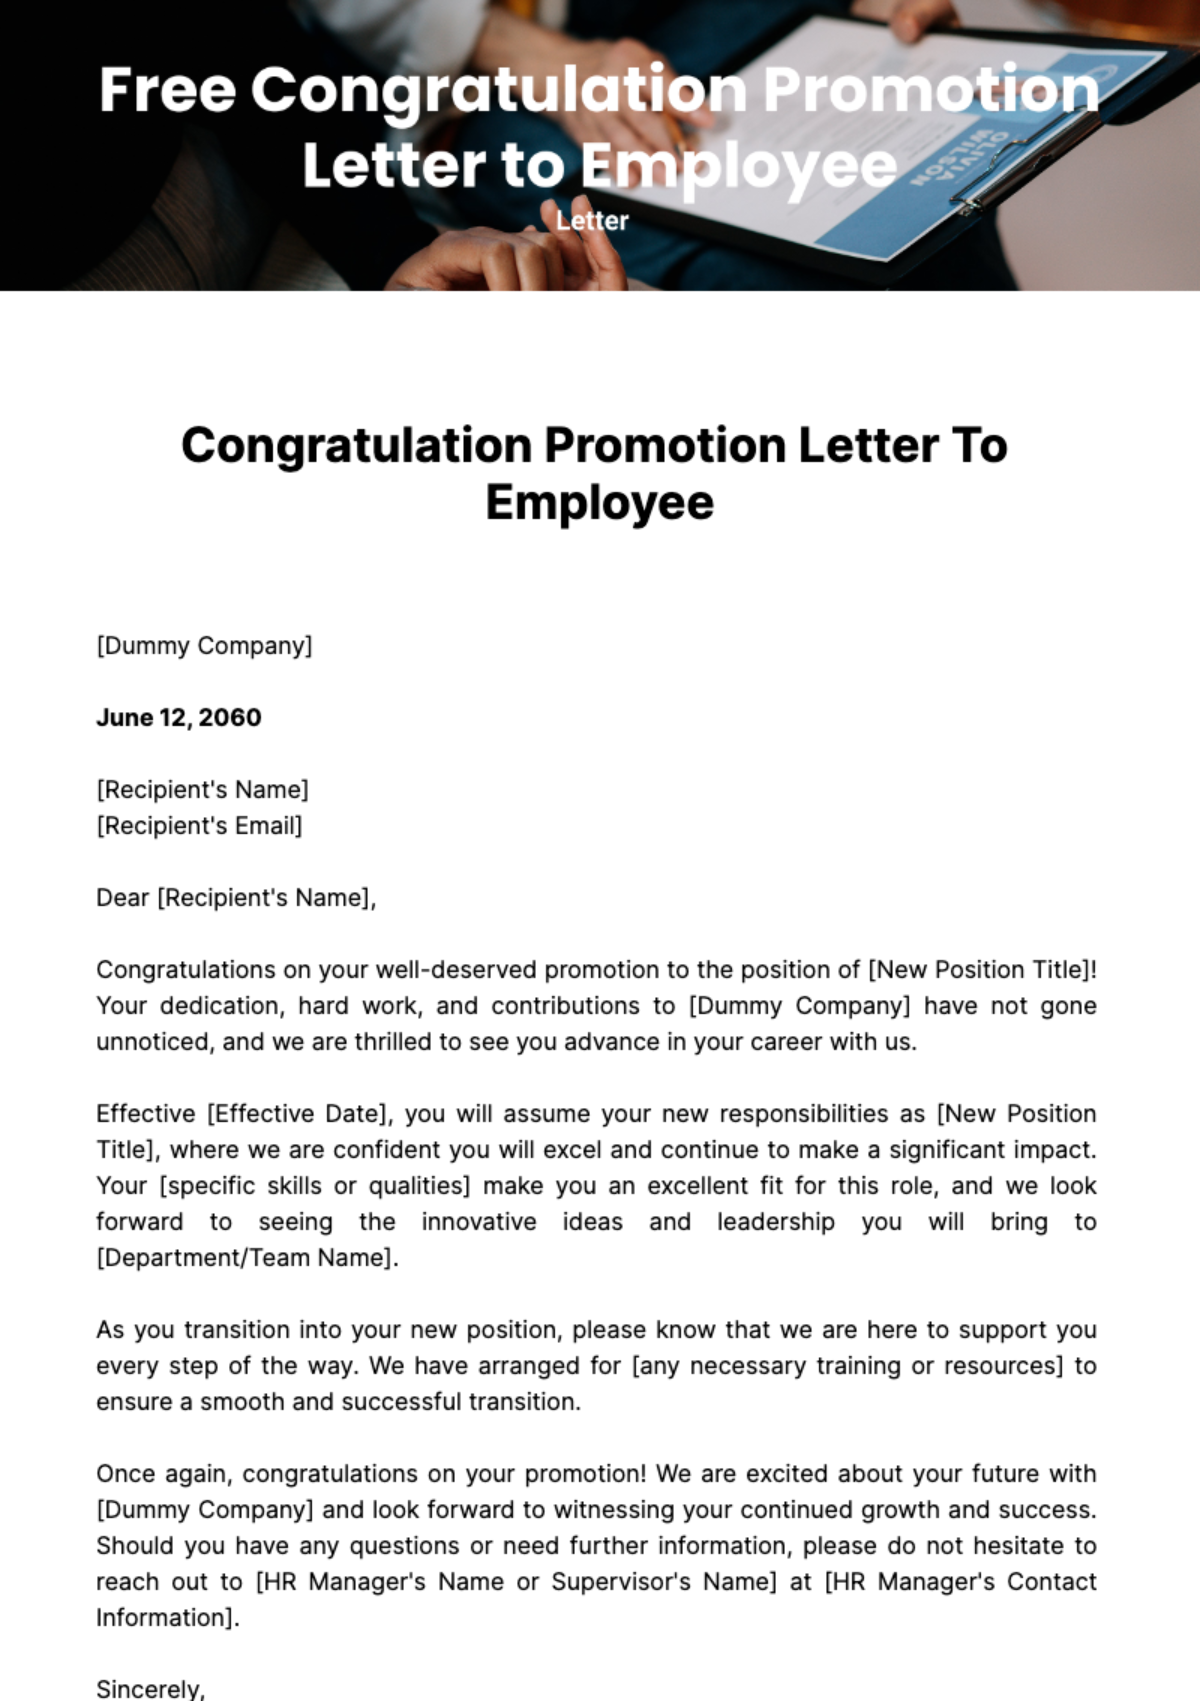 Congratulation Promotion Letter to Employee Template